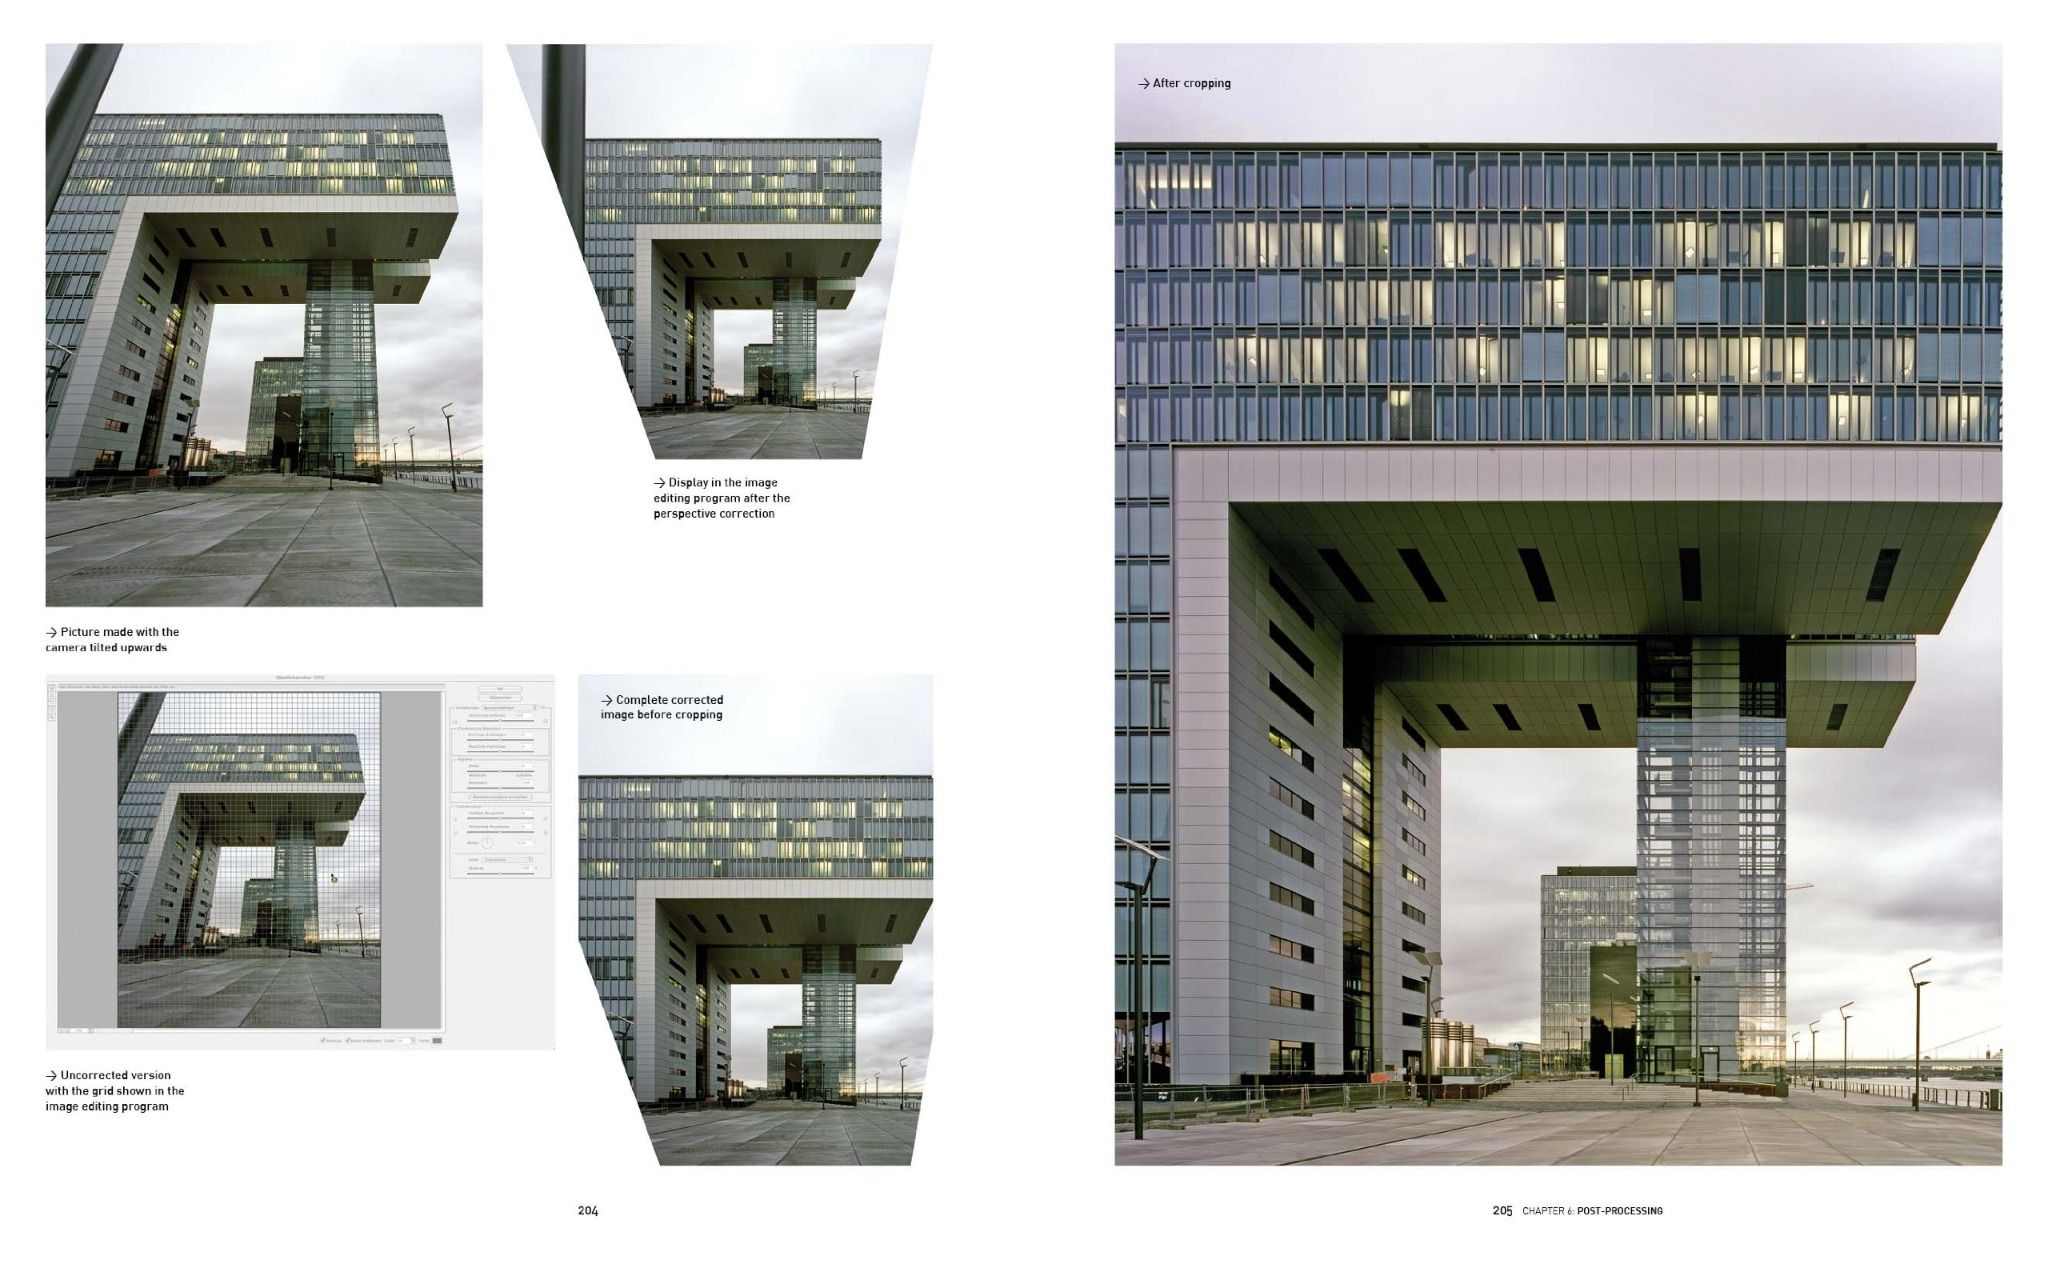  Architectural Photography_Anton Simons_9783869221946_DOM Publishers 